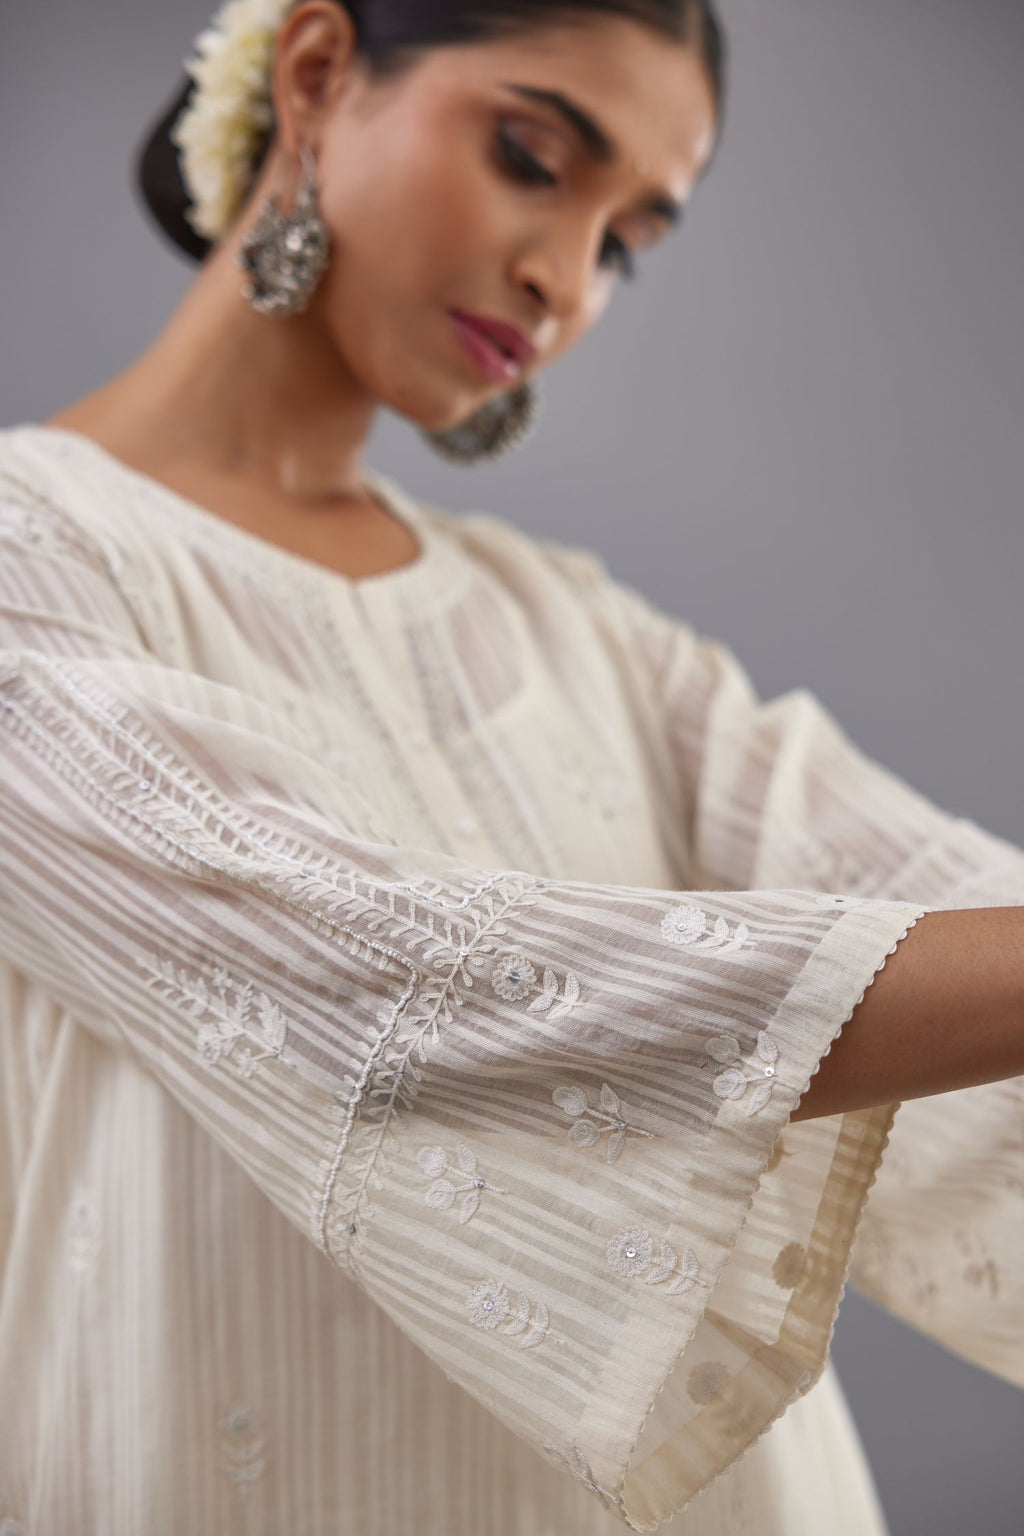 Off-white cotton chanderi A-line kurta set with all-over assorted flowers embroidery, highlighted with sequins handwork.